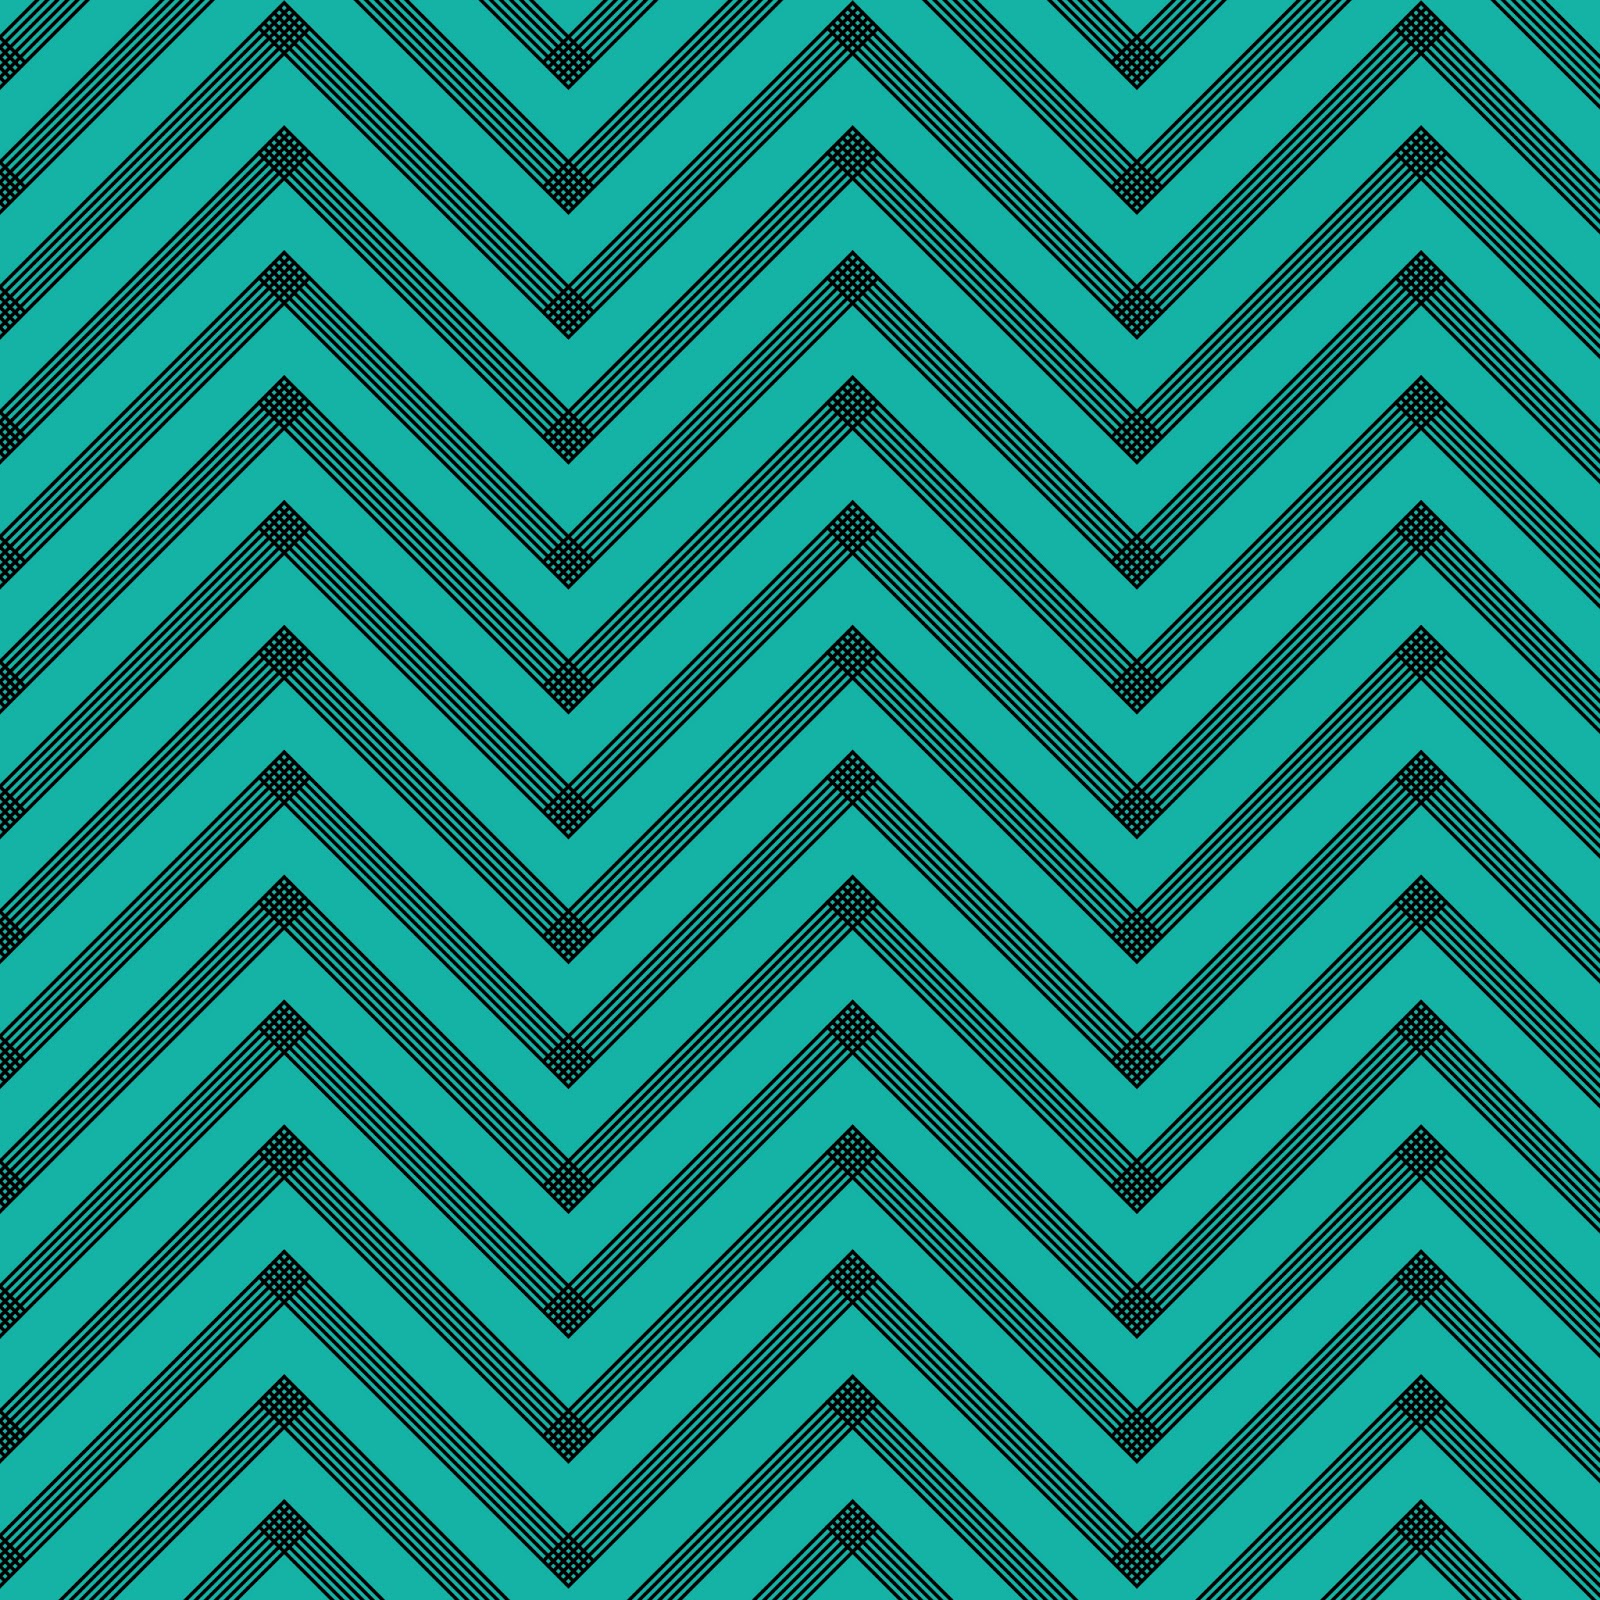 Teal And White Patterns